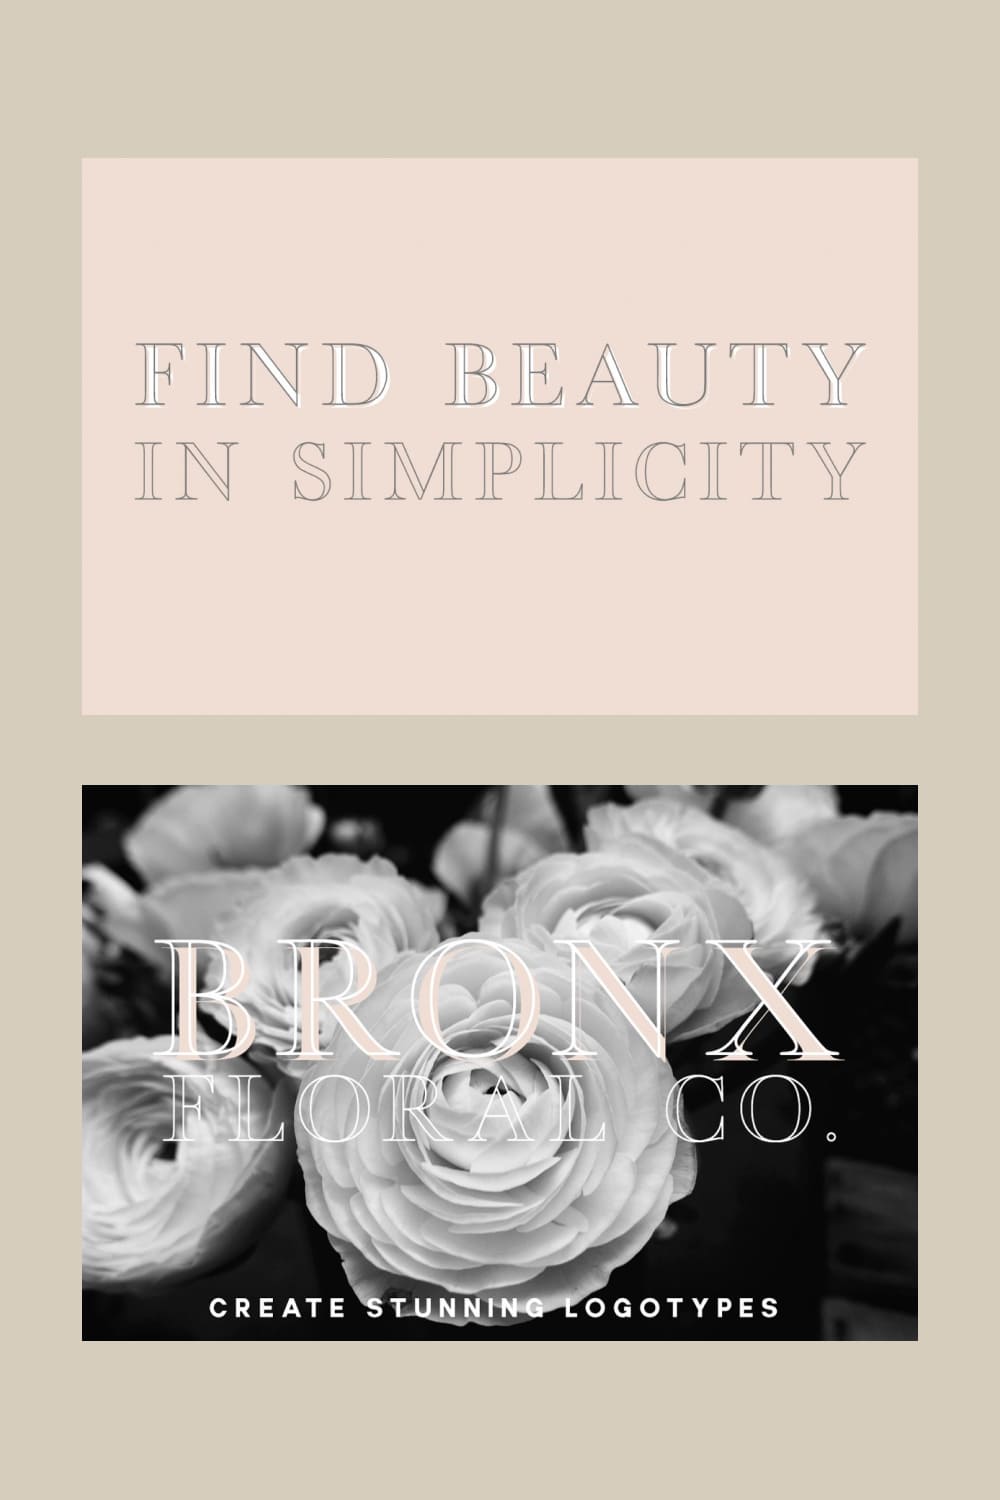 Bronx, An Extension For Manhattan By Jen Wagner Co -"Find Beauty In Simplicity".